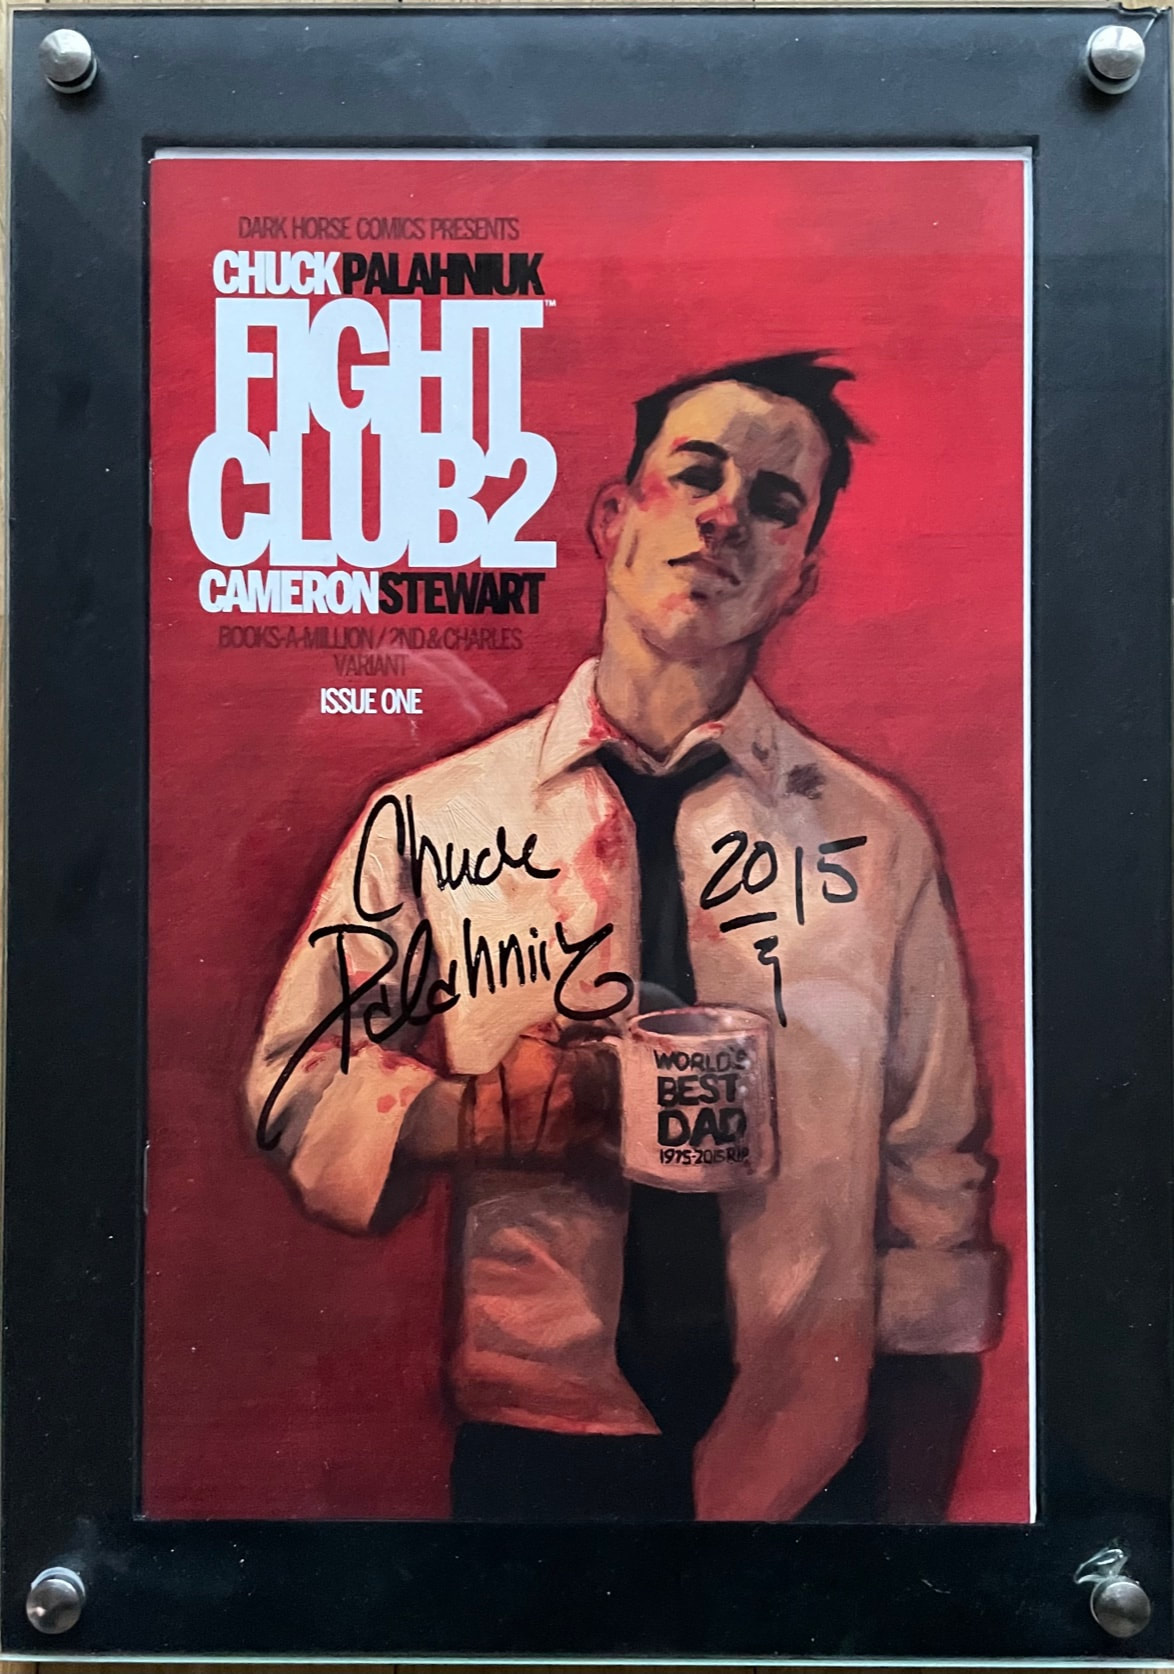 FIGHT CLUB 2 Issue #1 BOA variant - personally SIGNED by CHUCK PALAHNIUK,  framed